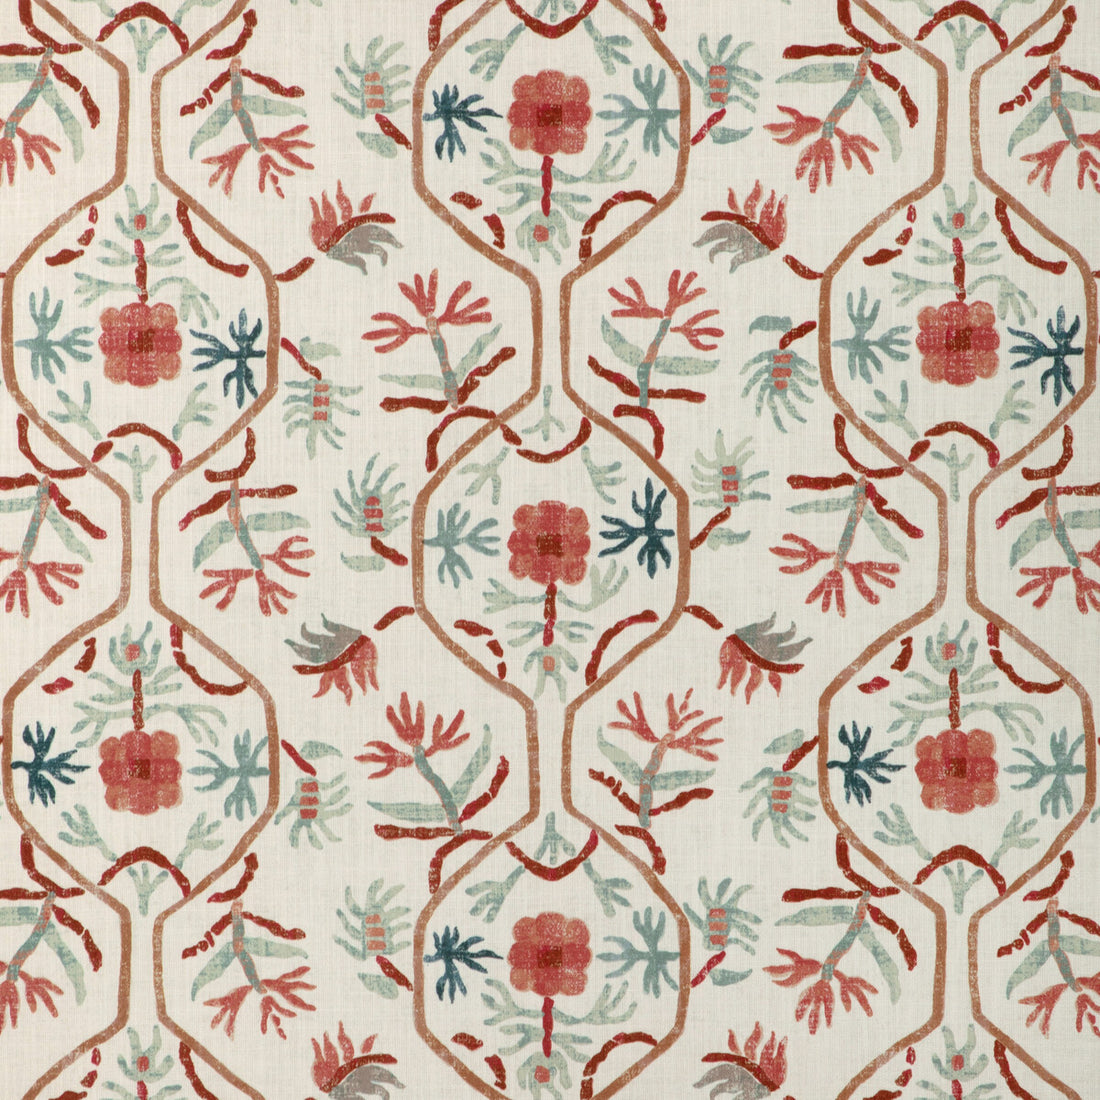 Le Jasmin Print fabric in spice color - pattern 8024110.3524.0 - by Brunschwig &amp; Fils in the Les Ensembliers L&